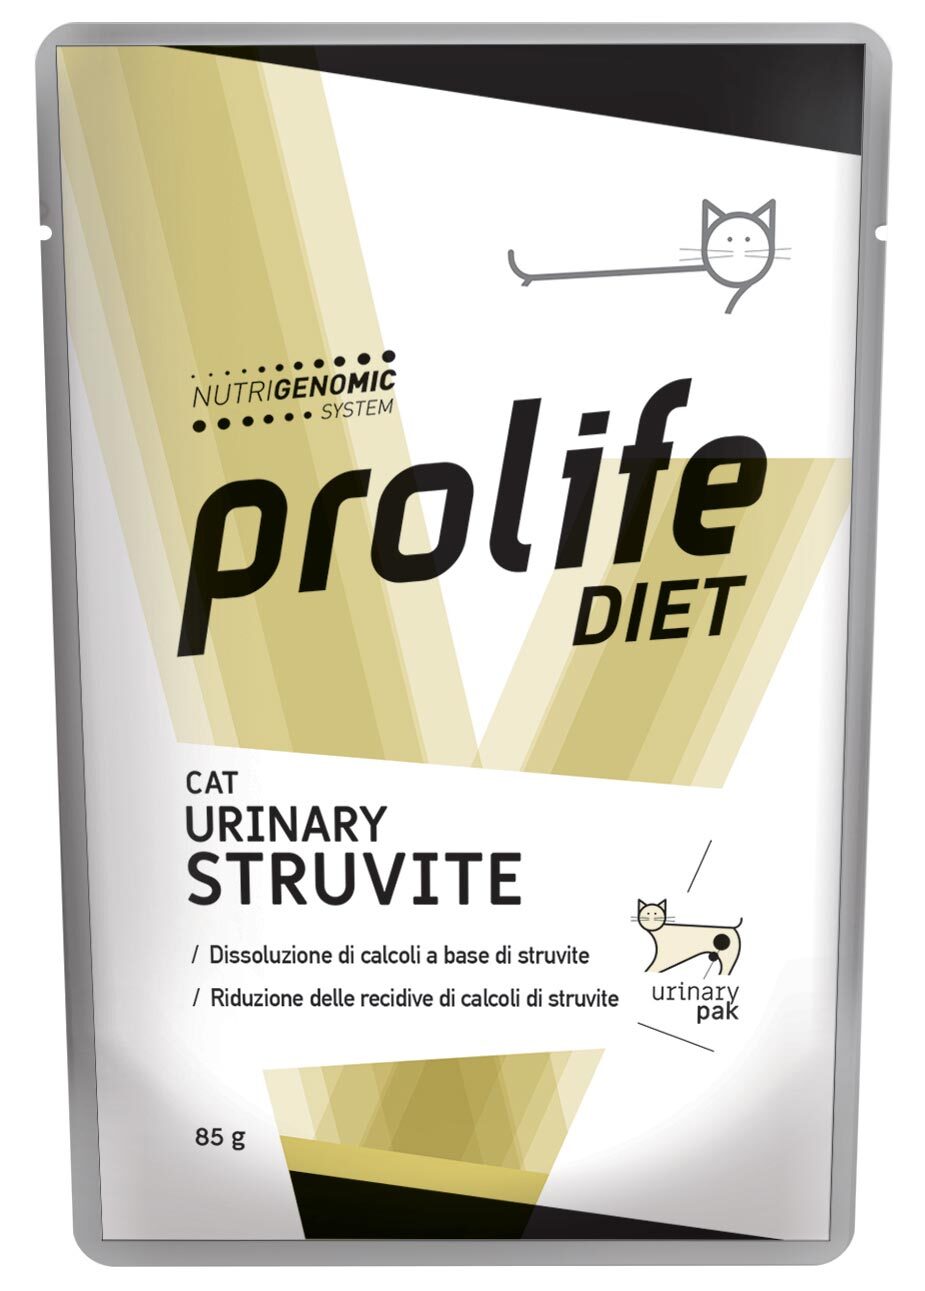 Complete dietetic pet food for cats, formulated to dissolve struvite stones and to reduce their recurrence (Feline Lower Urinary Tract Disease)
